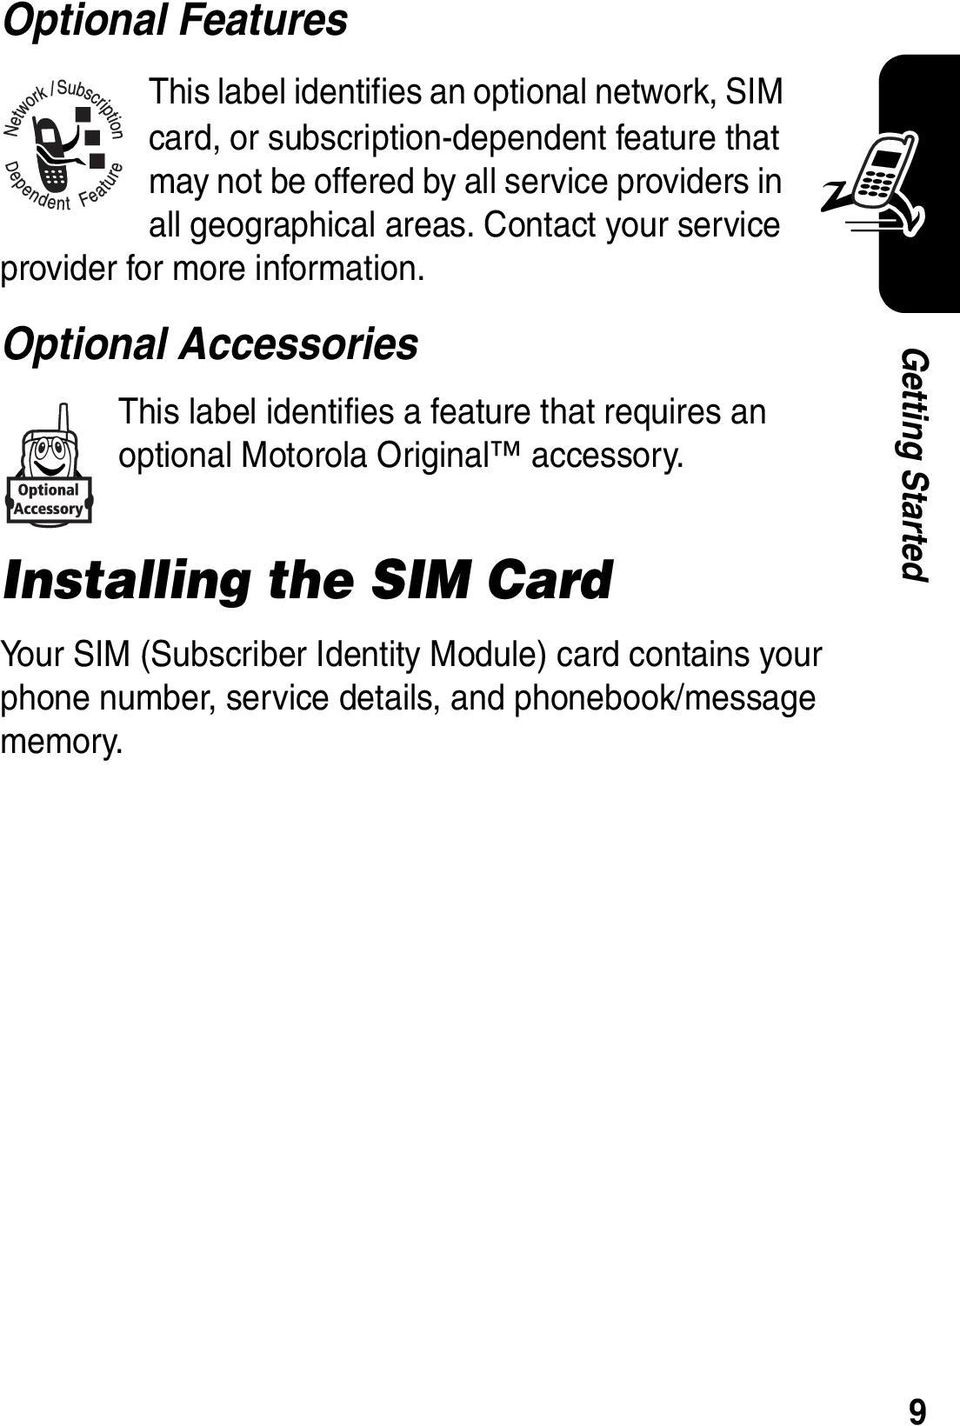 Optional Accessories This label identifies a feature that requires an optional Motorola Original accessory.